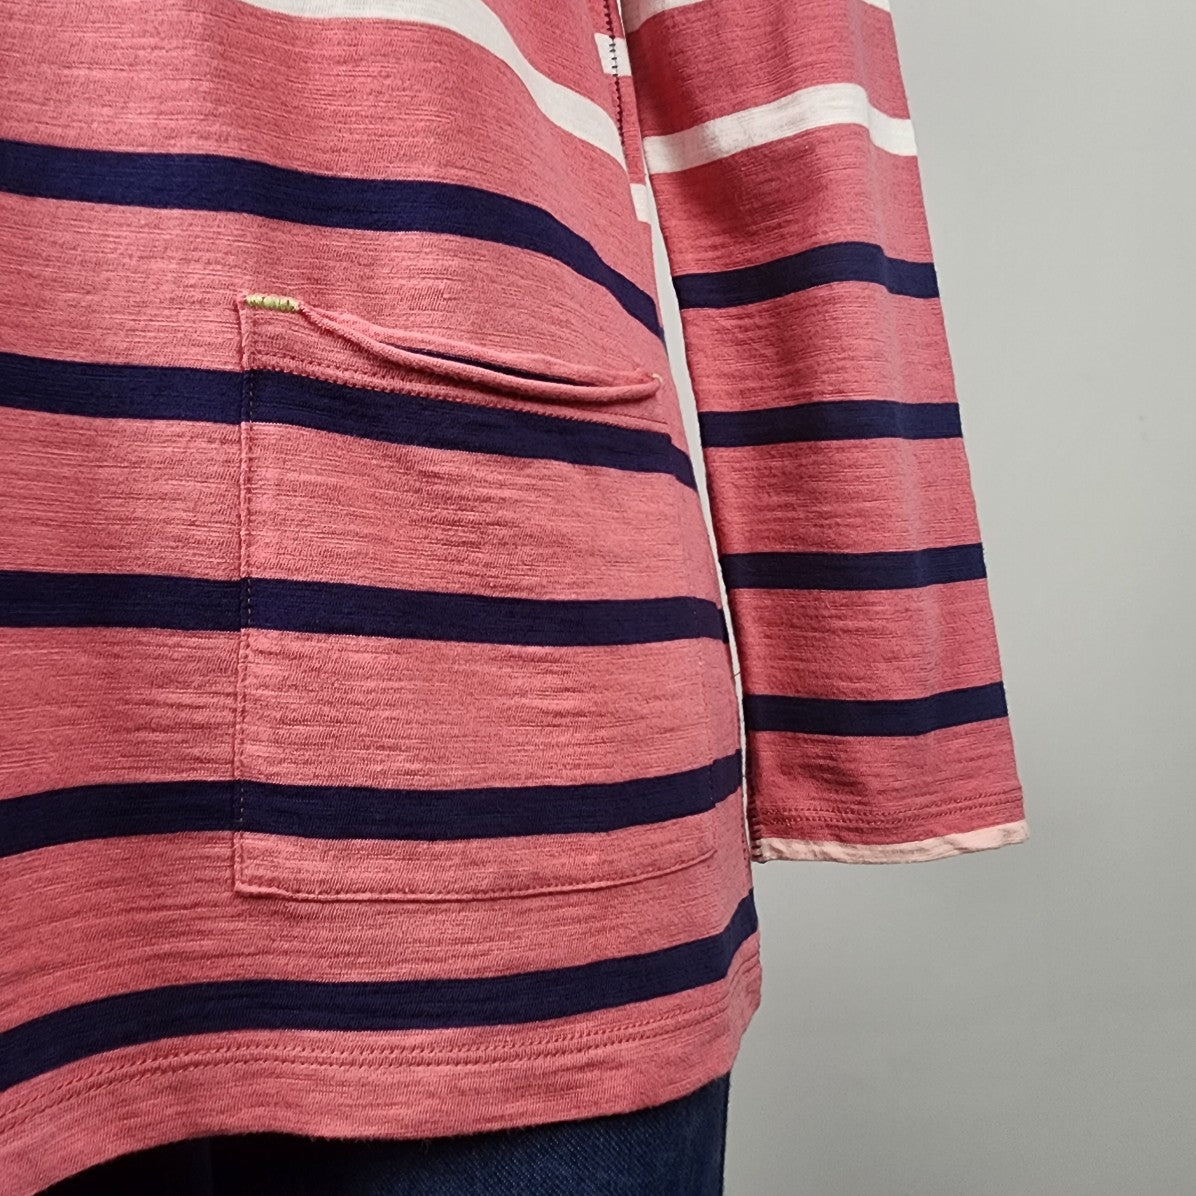 White Stuff Red Cotton Striped Front Pocket Long Sleeve Top Size 8